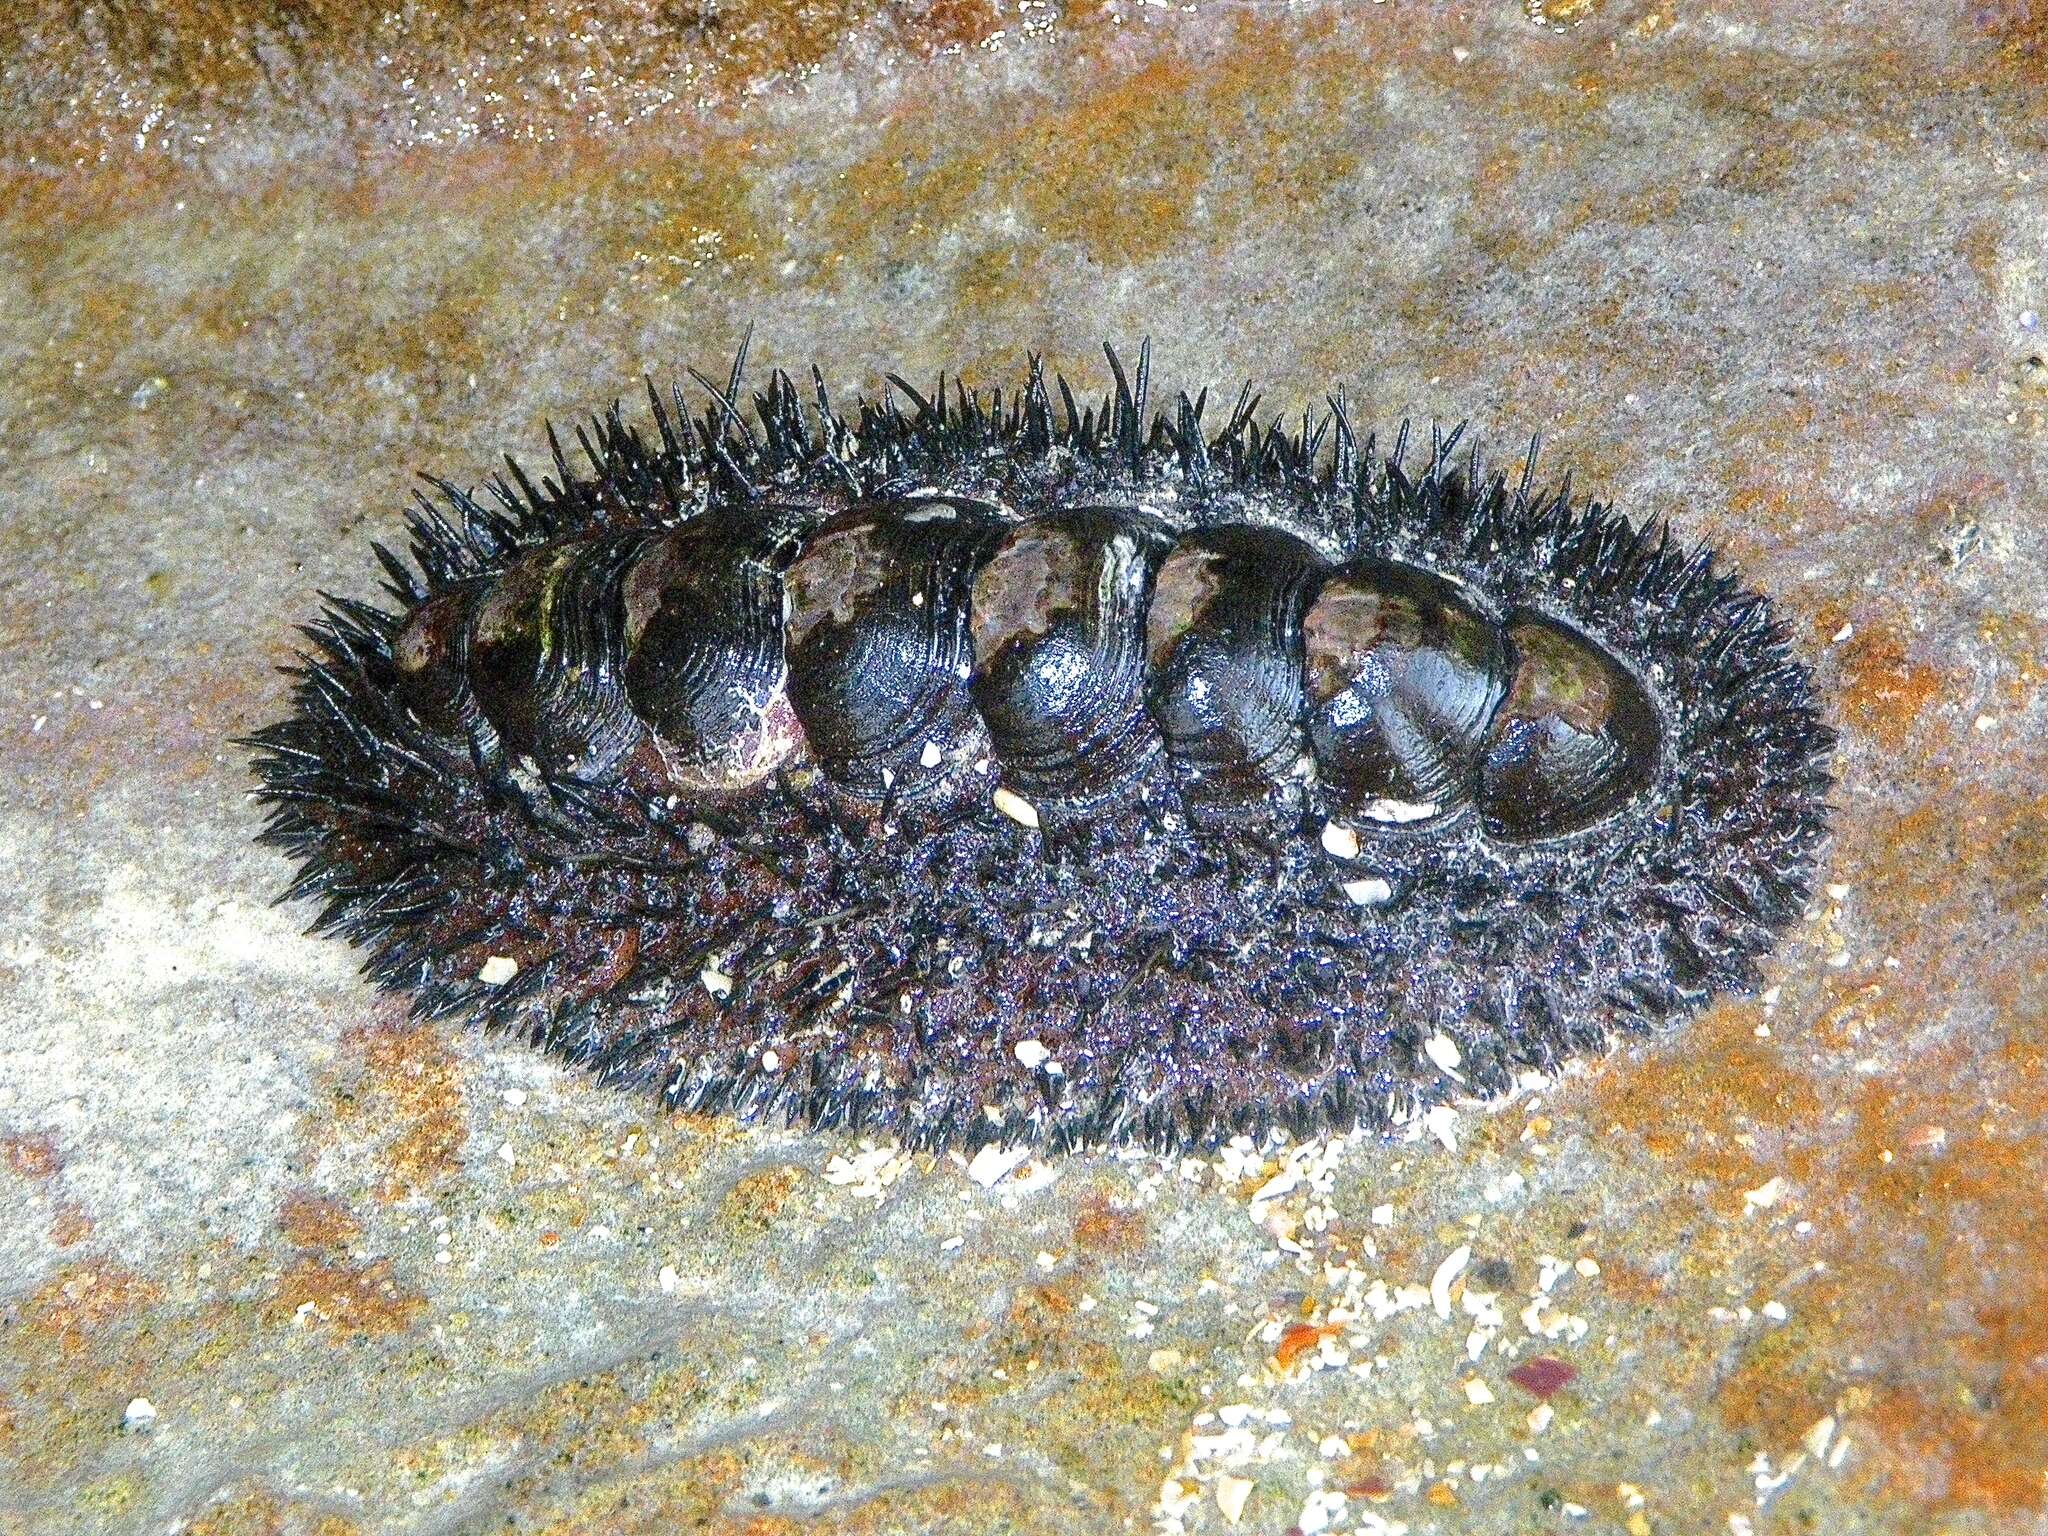 Image of Acanthopleura spinosa (Bruguière 1792)